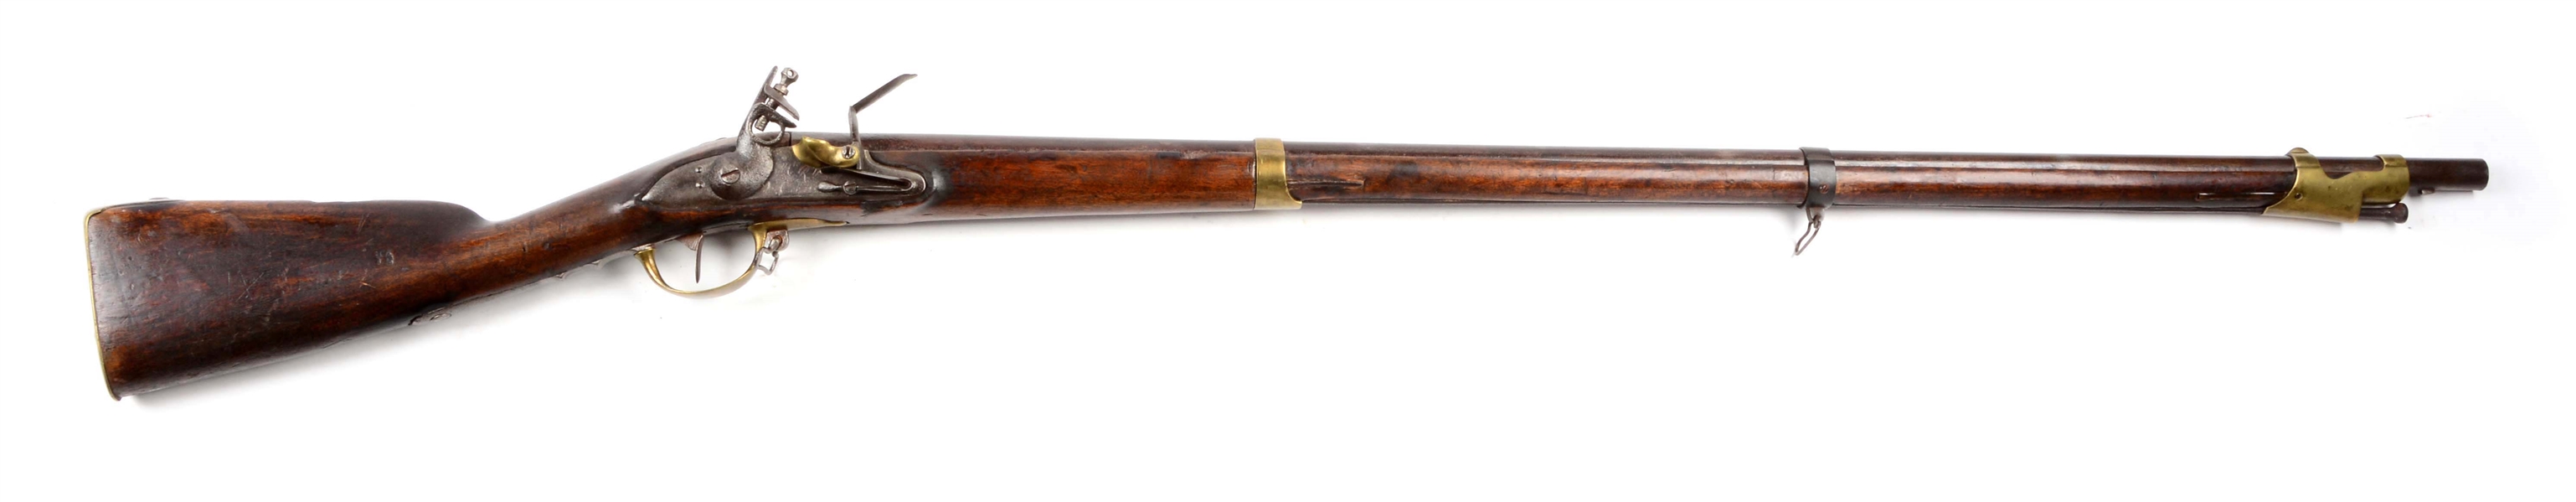 (A) FRENCH MODEL 1779-1786 TULLE NAVAL PERSONNEL OR MARINE FLINTLOCK MUSKET.